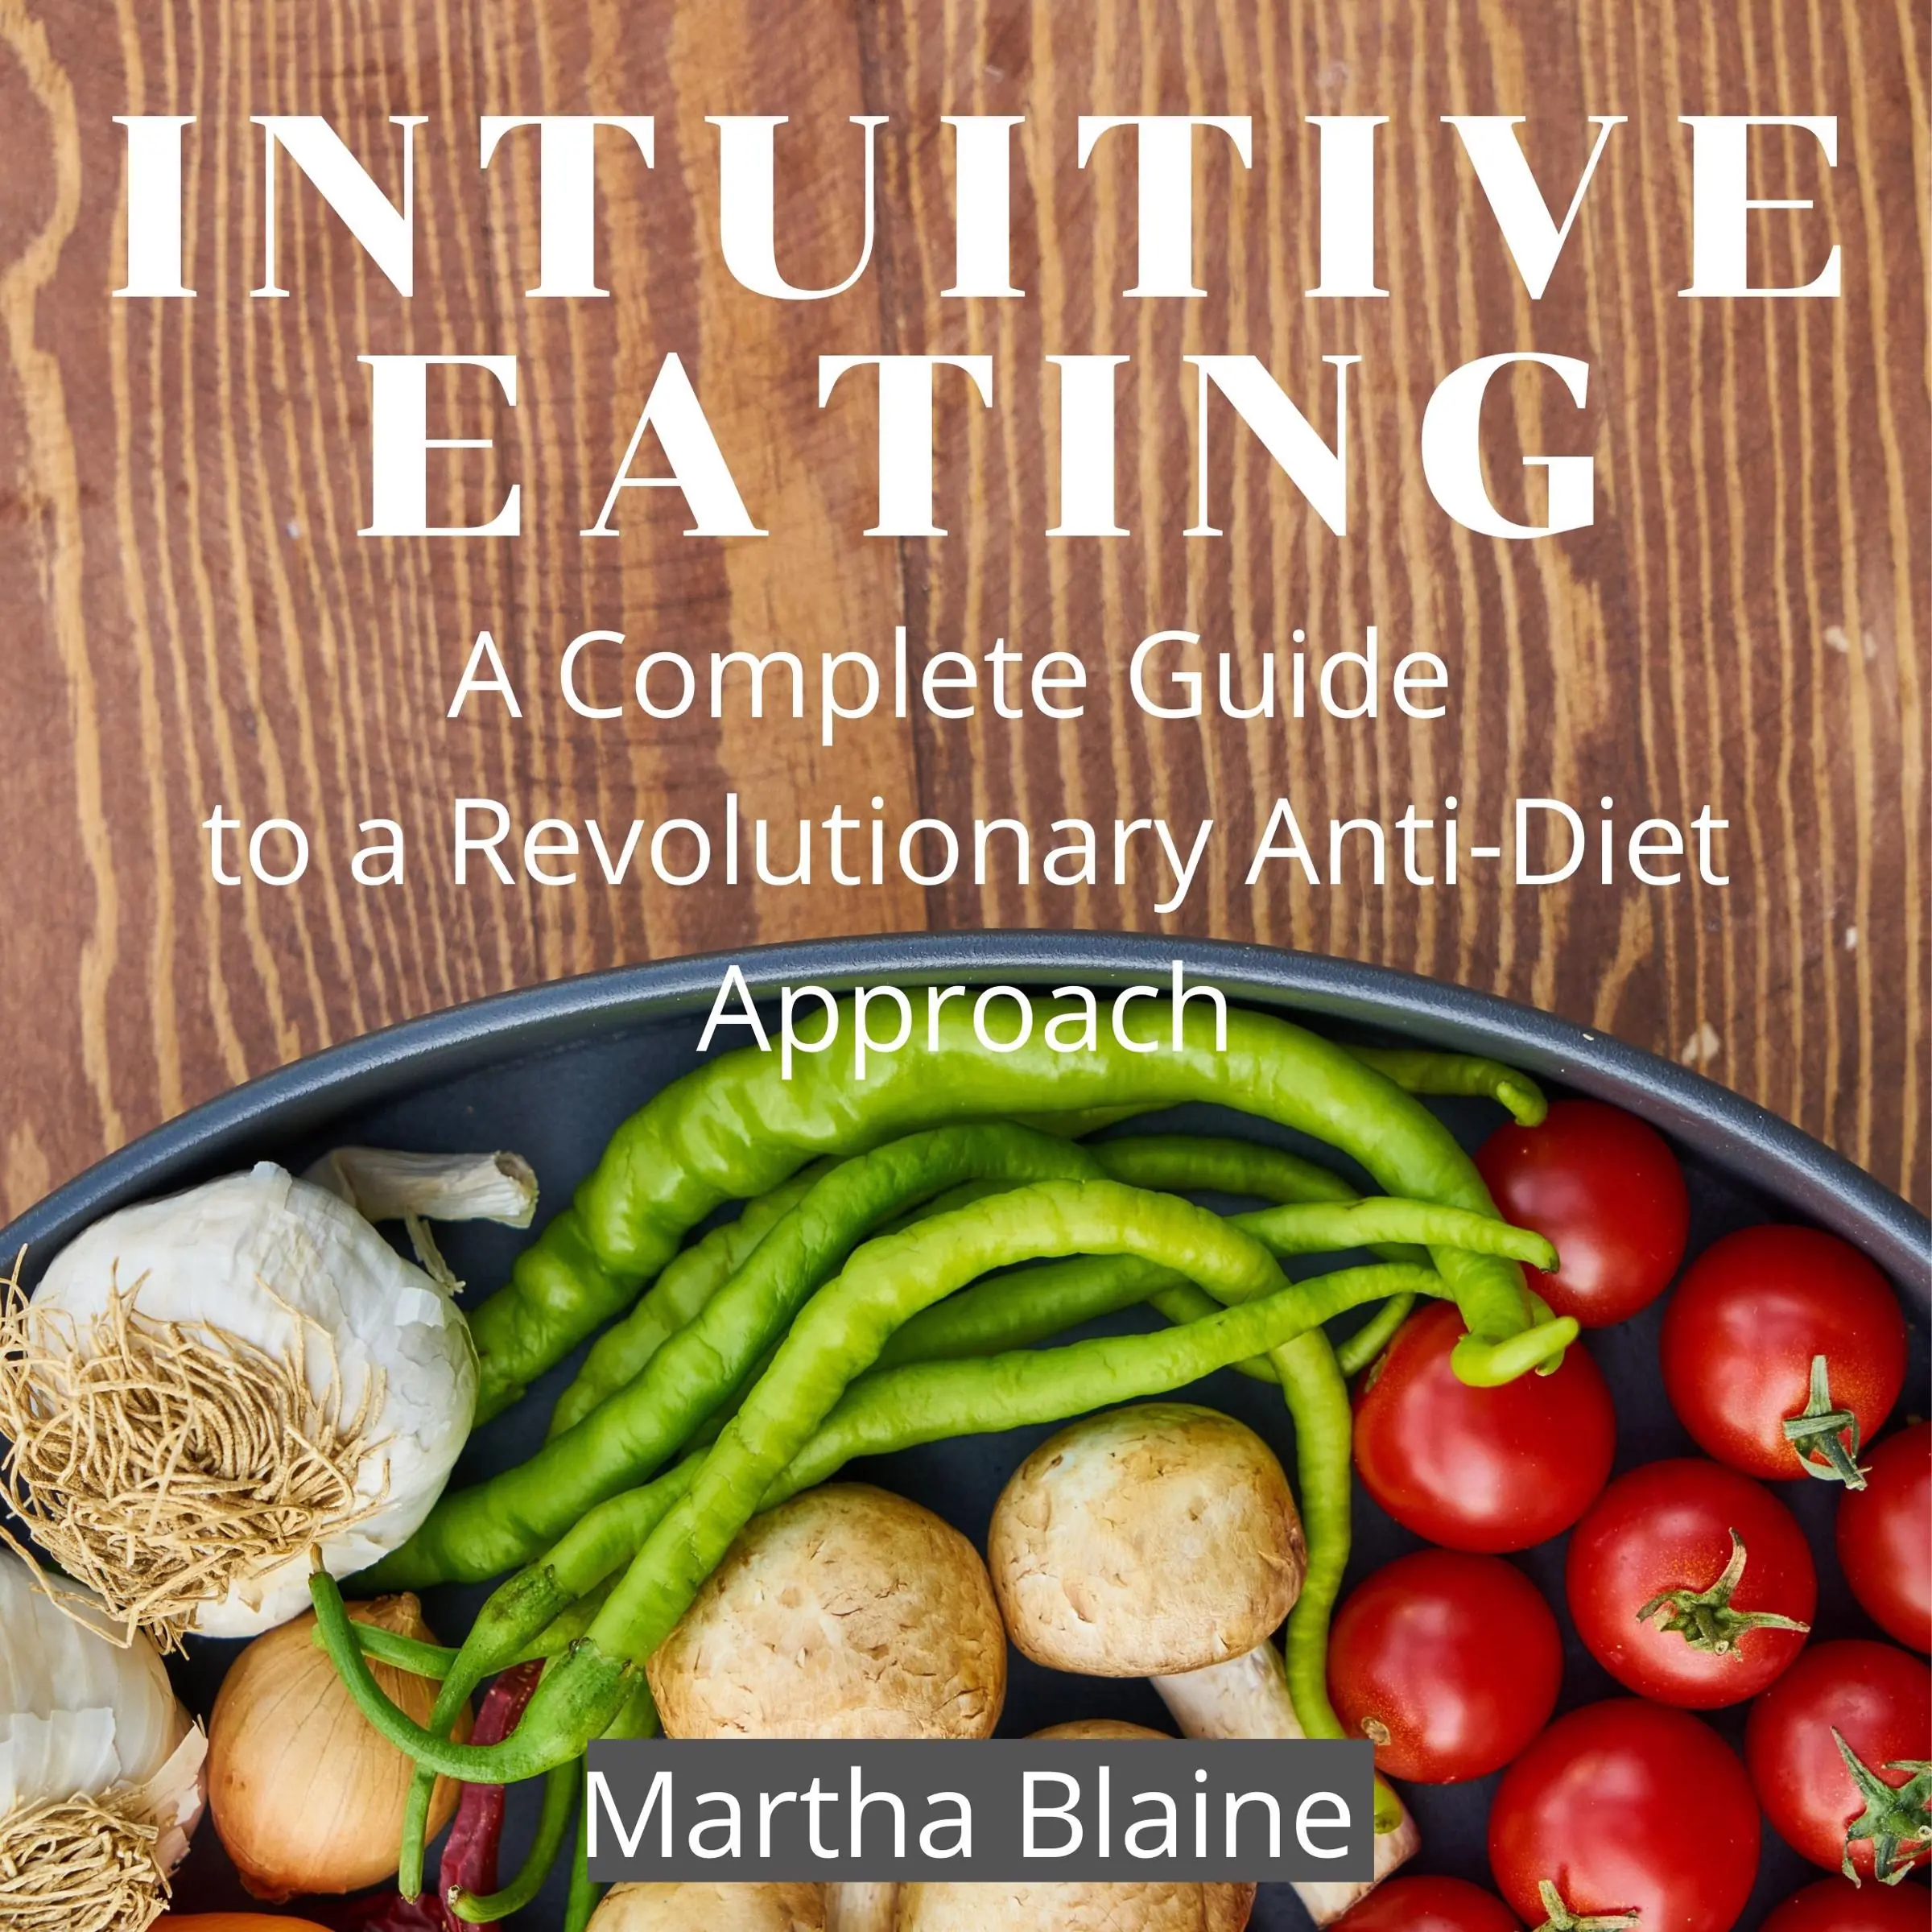 Intuitive Eating: A Complete Guide to a Revolutionary Anti-Diet Approach Audiobook by Martha Blaine